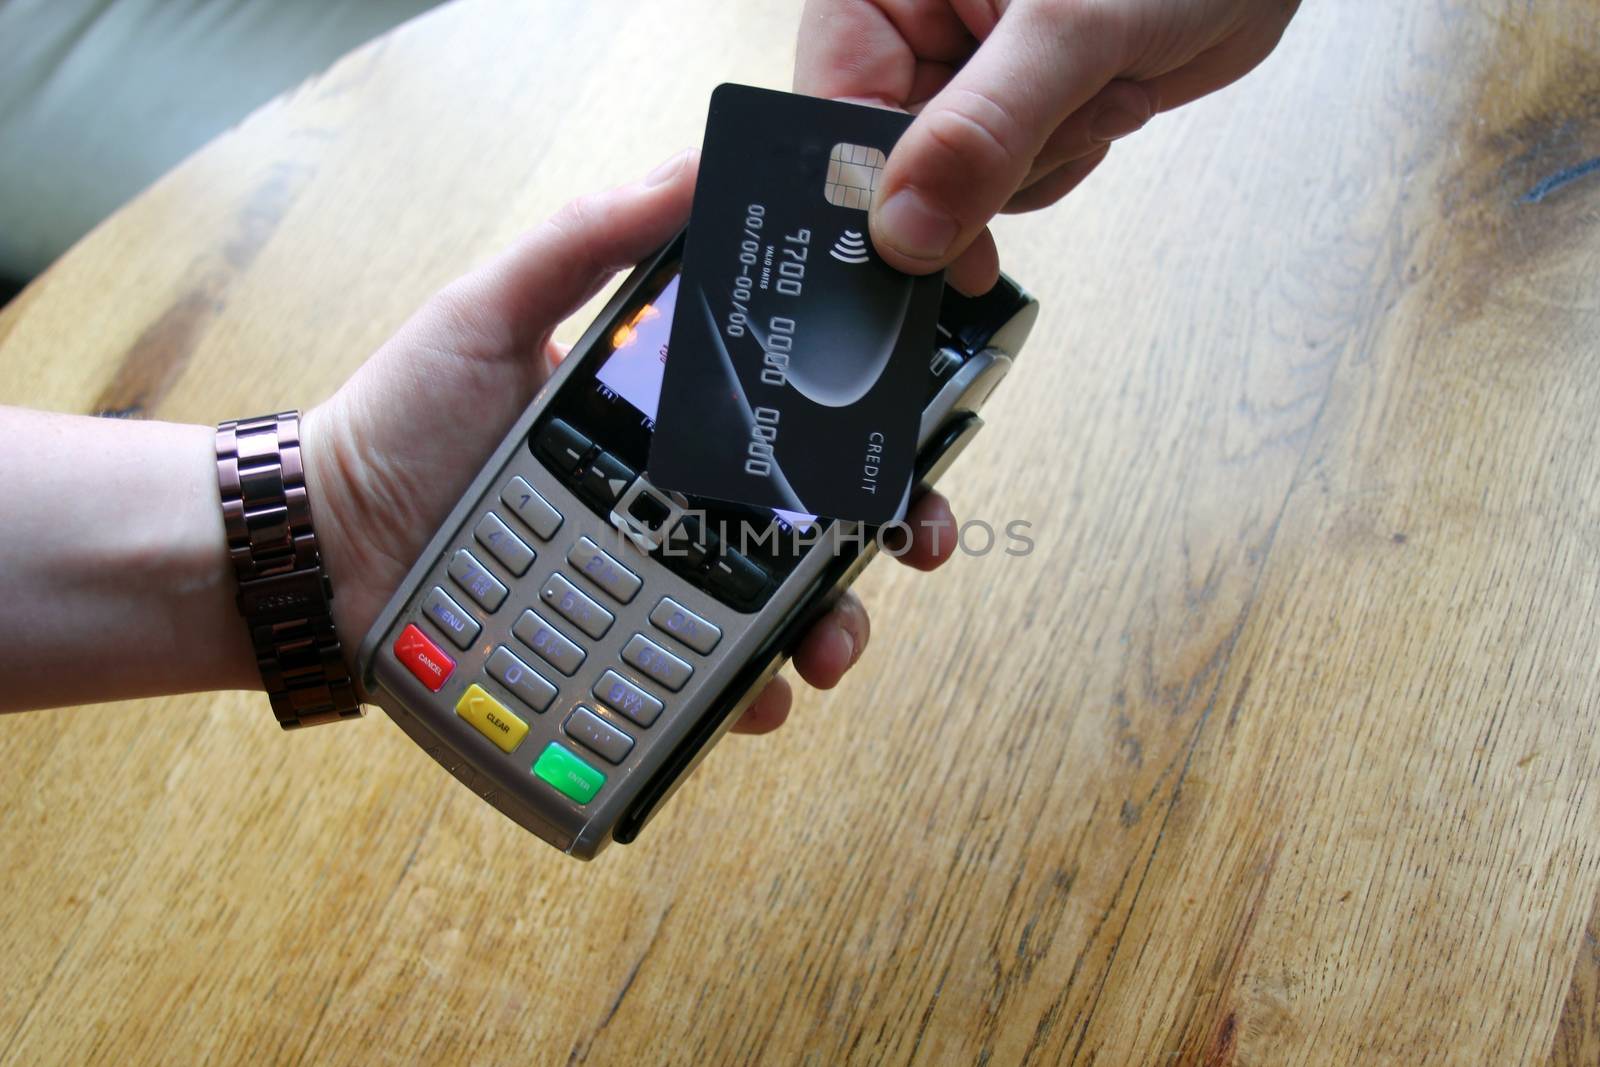 contactless payment card pdq background copy space with hand holding credit card ready to pay